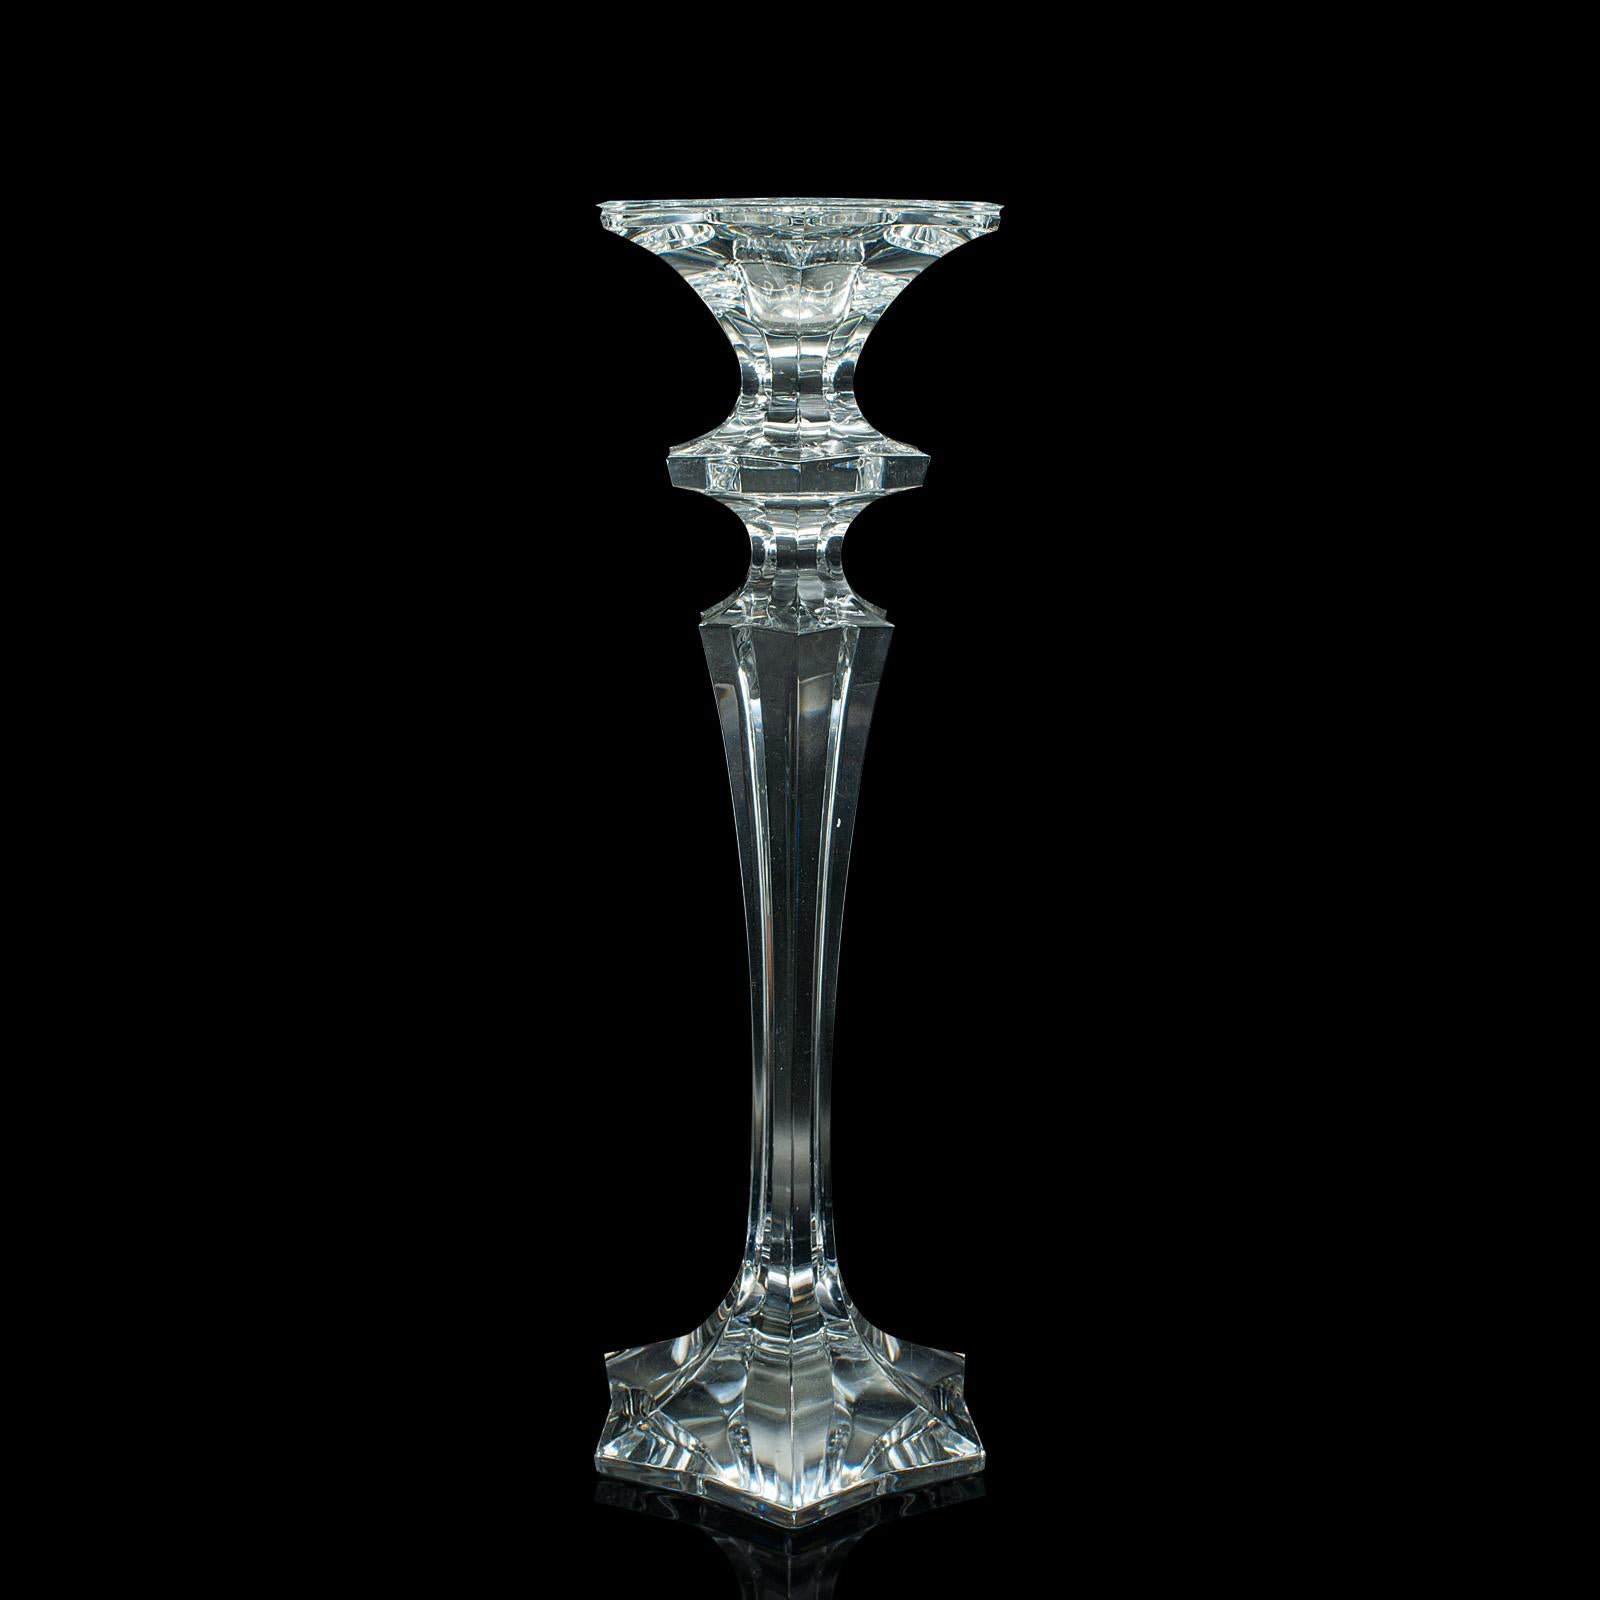 20th Century Pair Of Vintage Candlesticks, English, Glass, Decorative Candle Nozzle, C.1970 For Sale